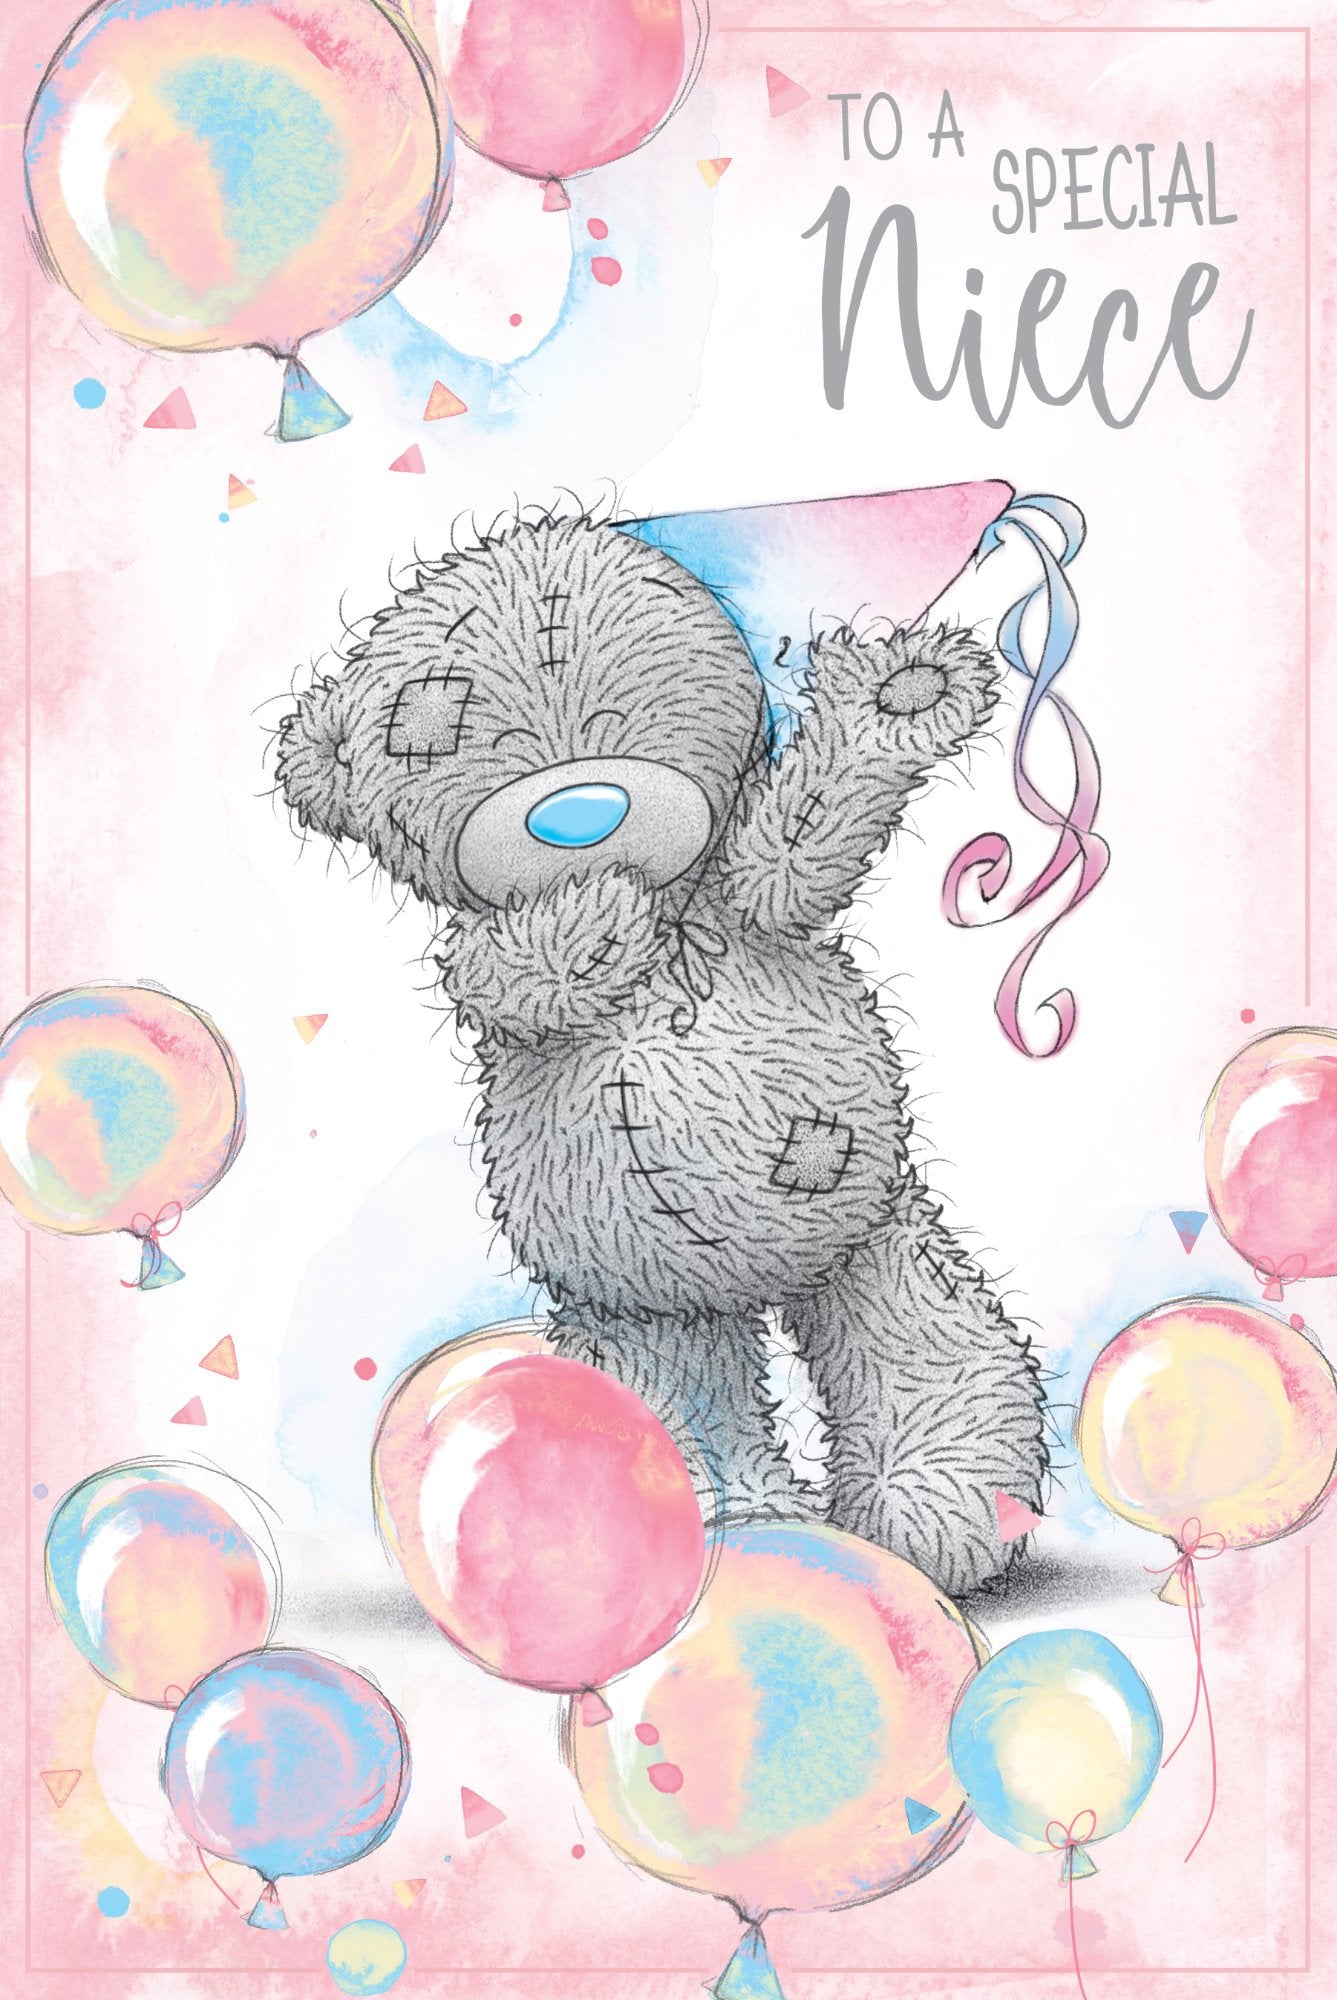 Photograph of Niece Birthday Teddy Party Greetings Card at Nicole's Shop